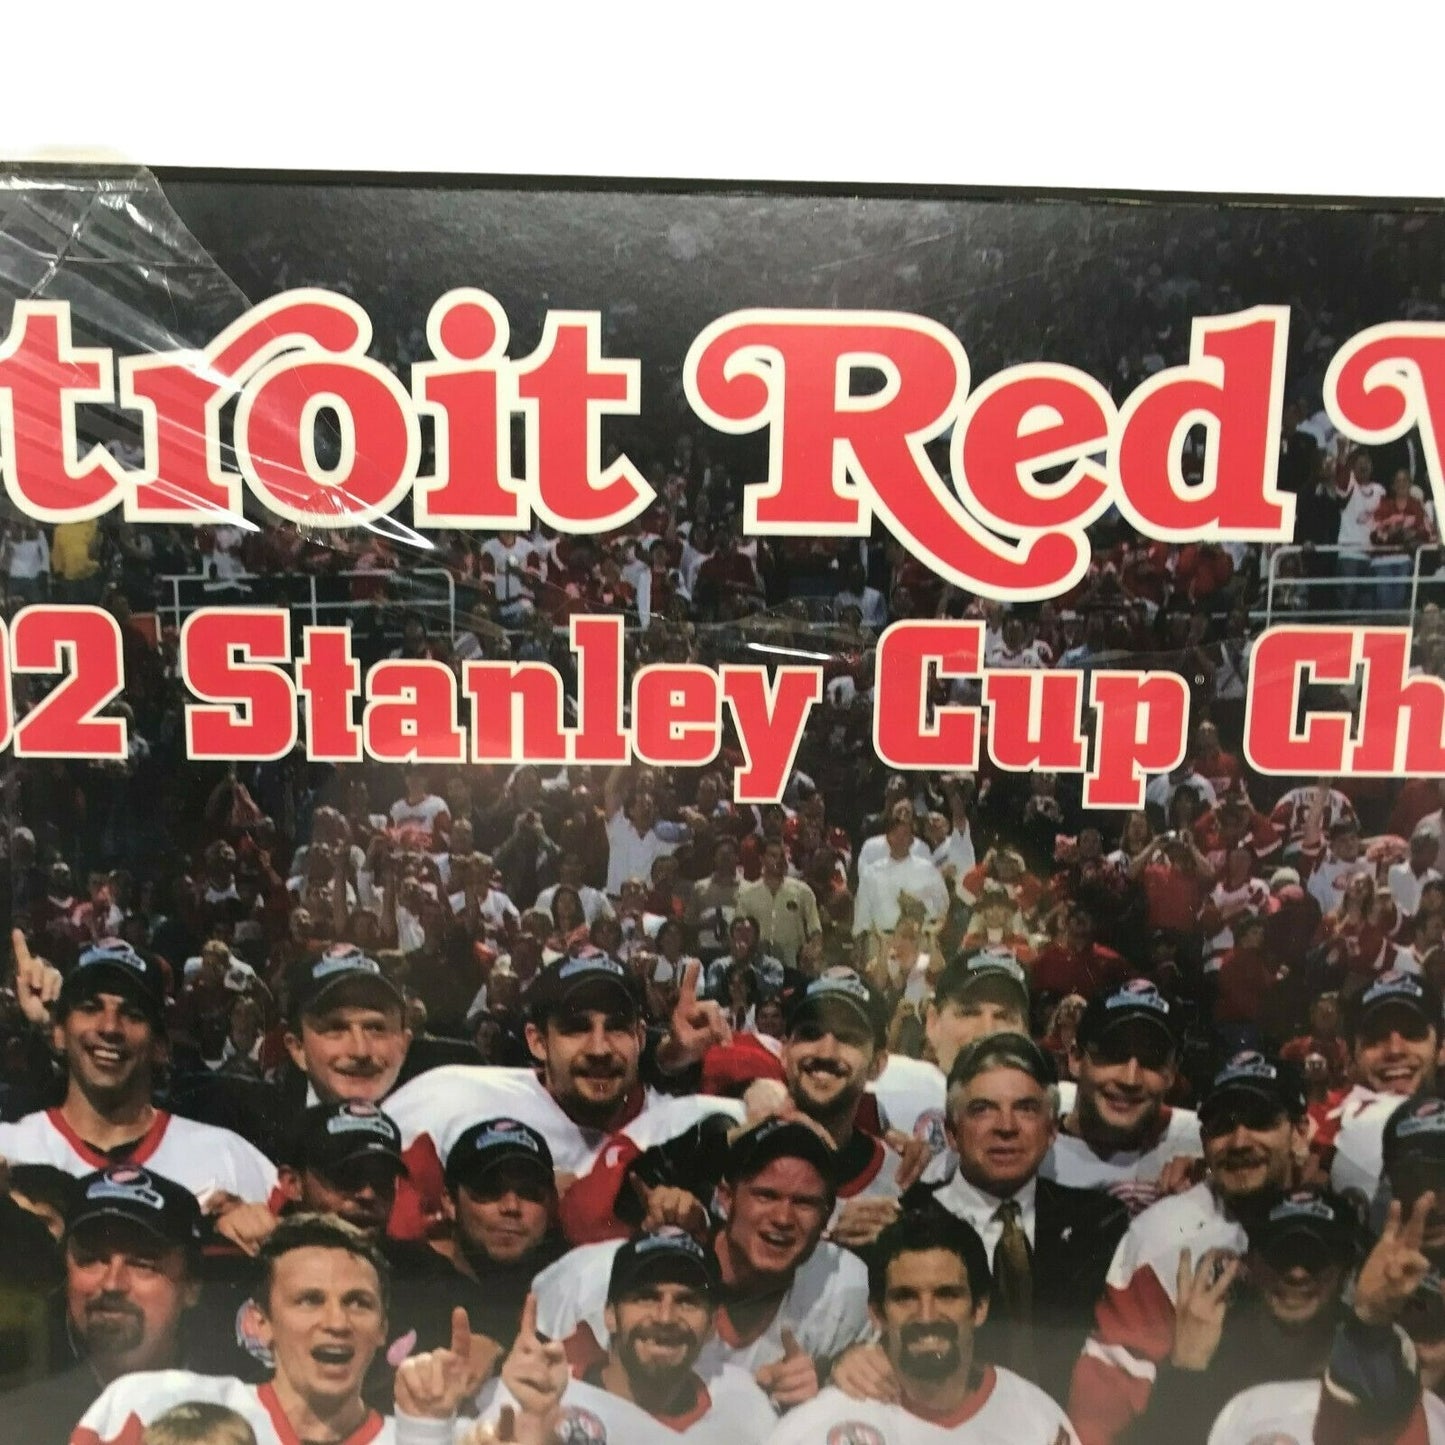 Detroit RED WINGS 2002 Stanley Cup CHAMPIONS Mounted Hockey Photo